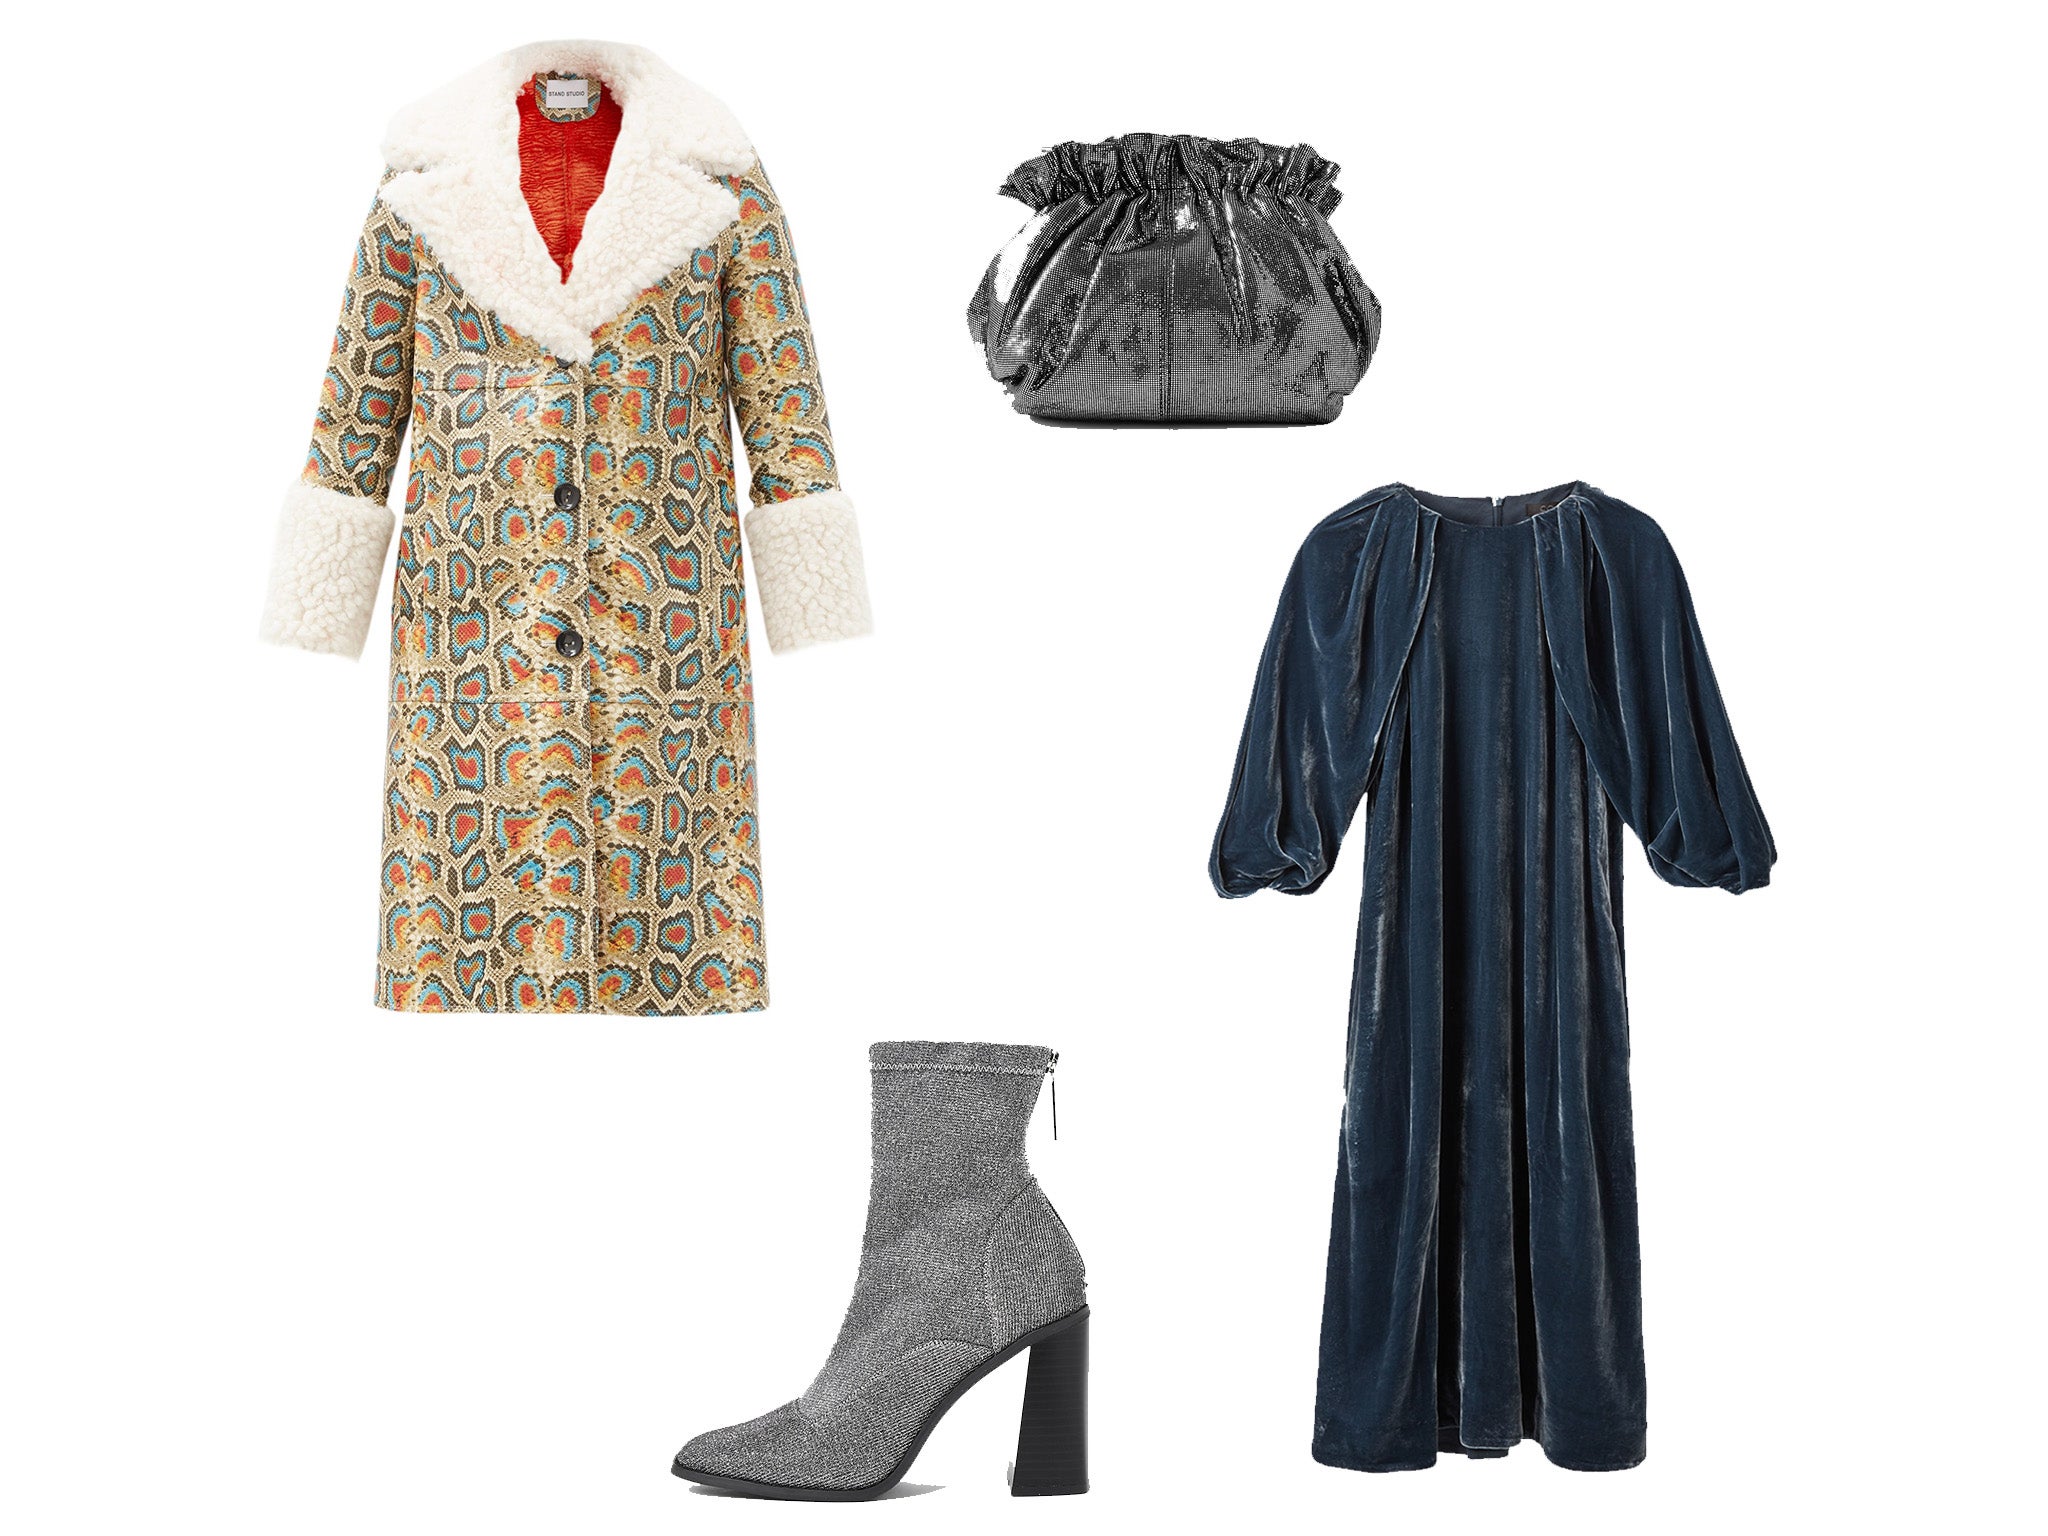 Linda faux shearling-trimmed faux-leather coat, £500, Matches Fashion; Silver sock block heel ankle boots, £48, River Island; Silk Velvet Puff Sleeve Dress, £99, Cos; Loeffler Randall, Willa metallic suede clutch, £215, Net-a-Porter